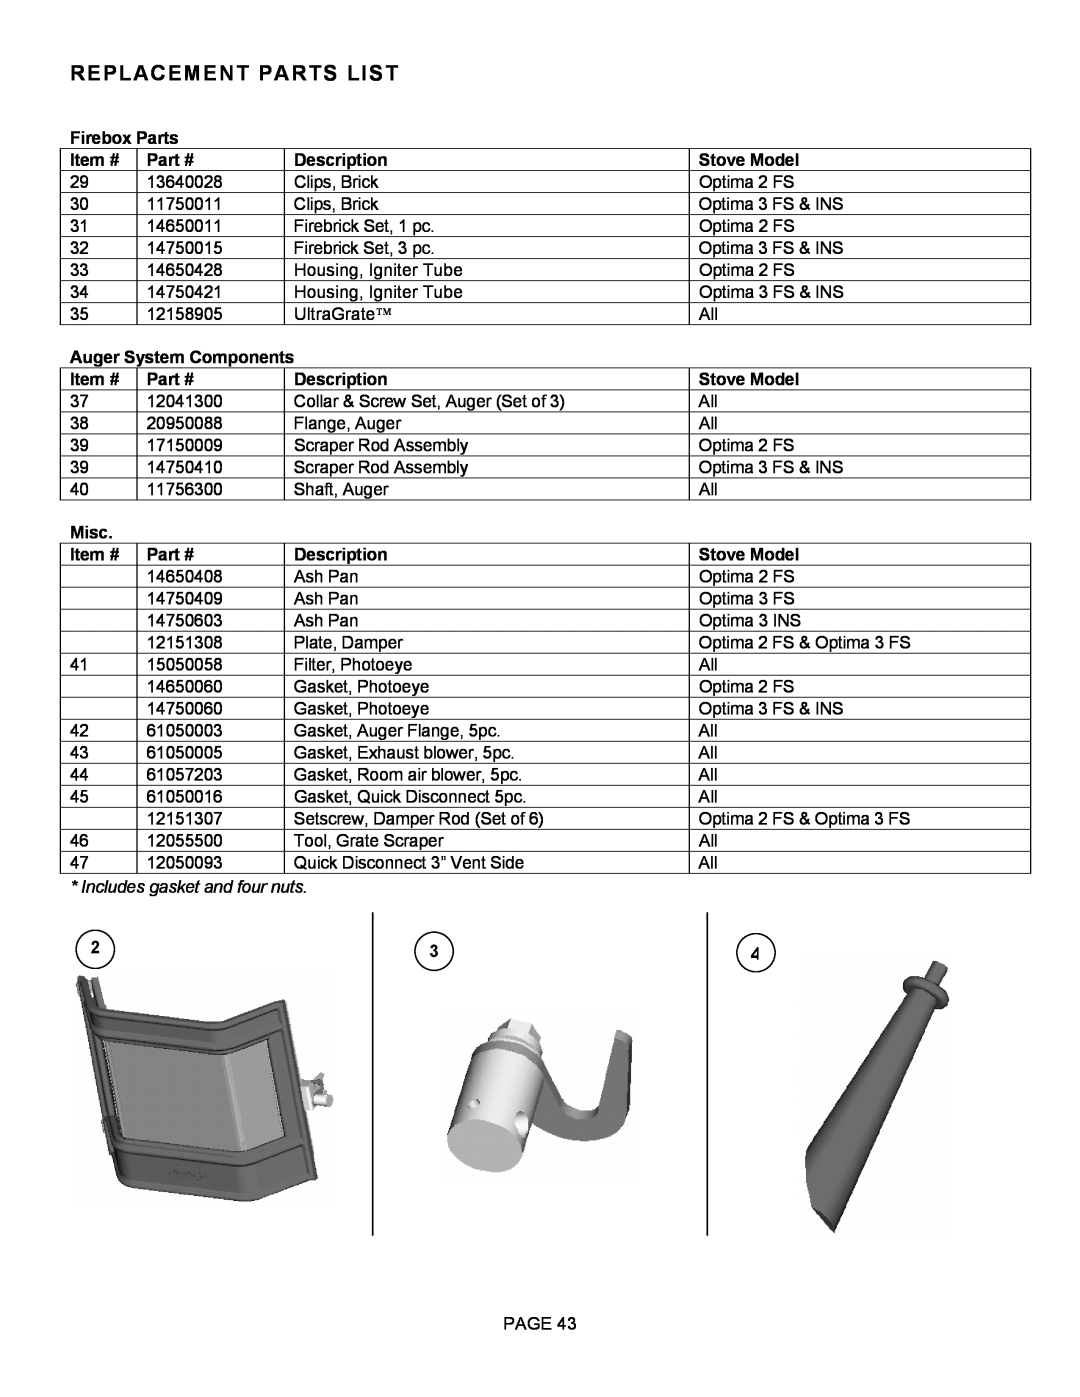 Lenoxx Electronics Optima 3 FS Firebox Parts, Auger System Components, Misc, Includes gasket and four nuts, Item #, Part # 